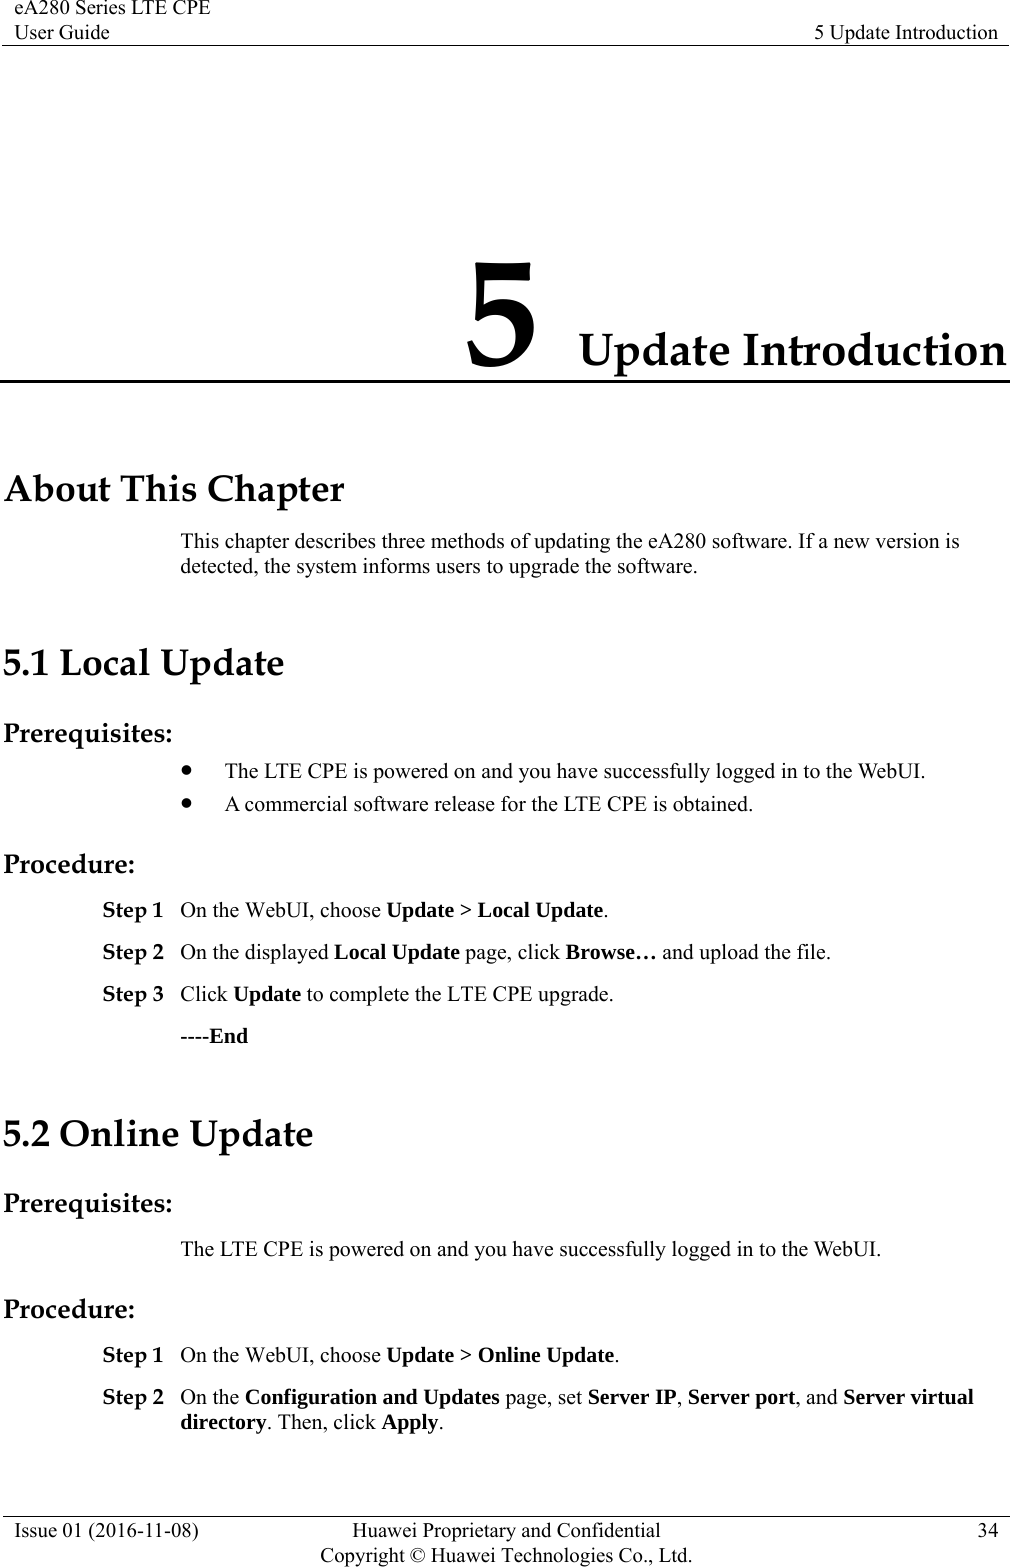 eA280 Series LTE CPE User Guide  5 Update Introduction Issue 01 (2016-11-08)  Huawei Proprietary and Confidential         Copyright © Huawei Technologies Co., Ltd.34 5 Update Introduction About This Chapter This chapter describes three methods of updating the eA280 software. If a new version is detected, the system informs users to upgrade the software.   5.1 Local Update Prerequisites:  The LTE CPE is powered on and you have successfully logged in to the WebUI.    A commercial software release for the LTE CPE is obtained. Procedure: Step 1 On the WebUI, choose Update &gt; Local Update.  Step 2 On the displayed Local Update page, click Browse… and upload the file.   Step 3 Click Update to complete the LTE CPE upgrade. ----End 5.2 Online Update Prerequisites: The LTE CPE is powered on and you have successfully logged in to the WebUI.   Procedure: Step 1 On the WebUI, choose Update &gt; Online Update.  Step 2 On the Configuration and Updates page, set Server IP, Server port, and Server virtual directory. Then, click Apply. 